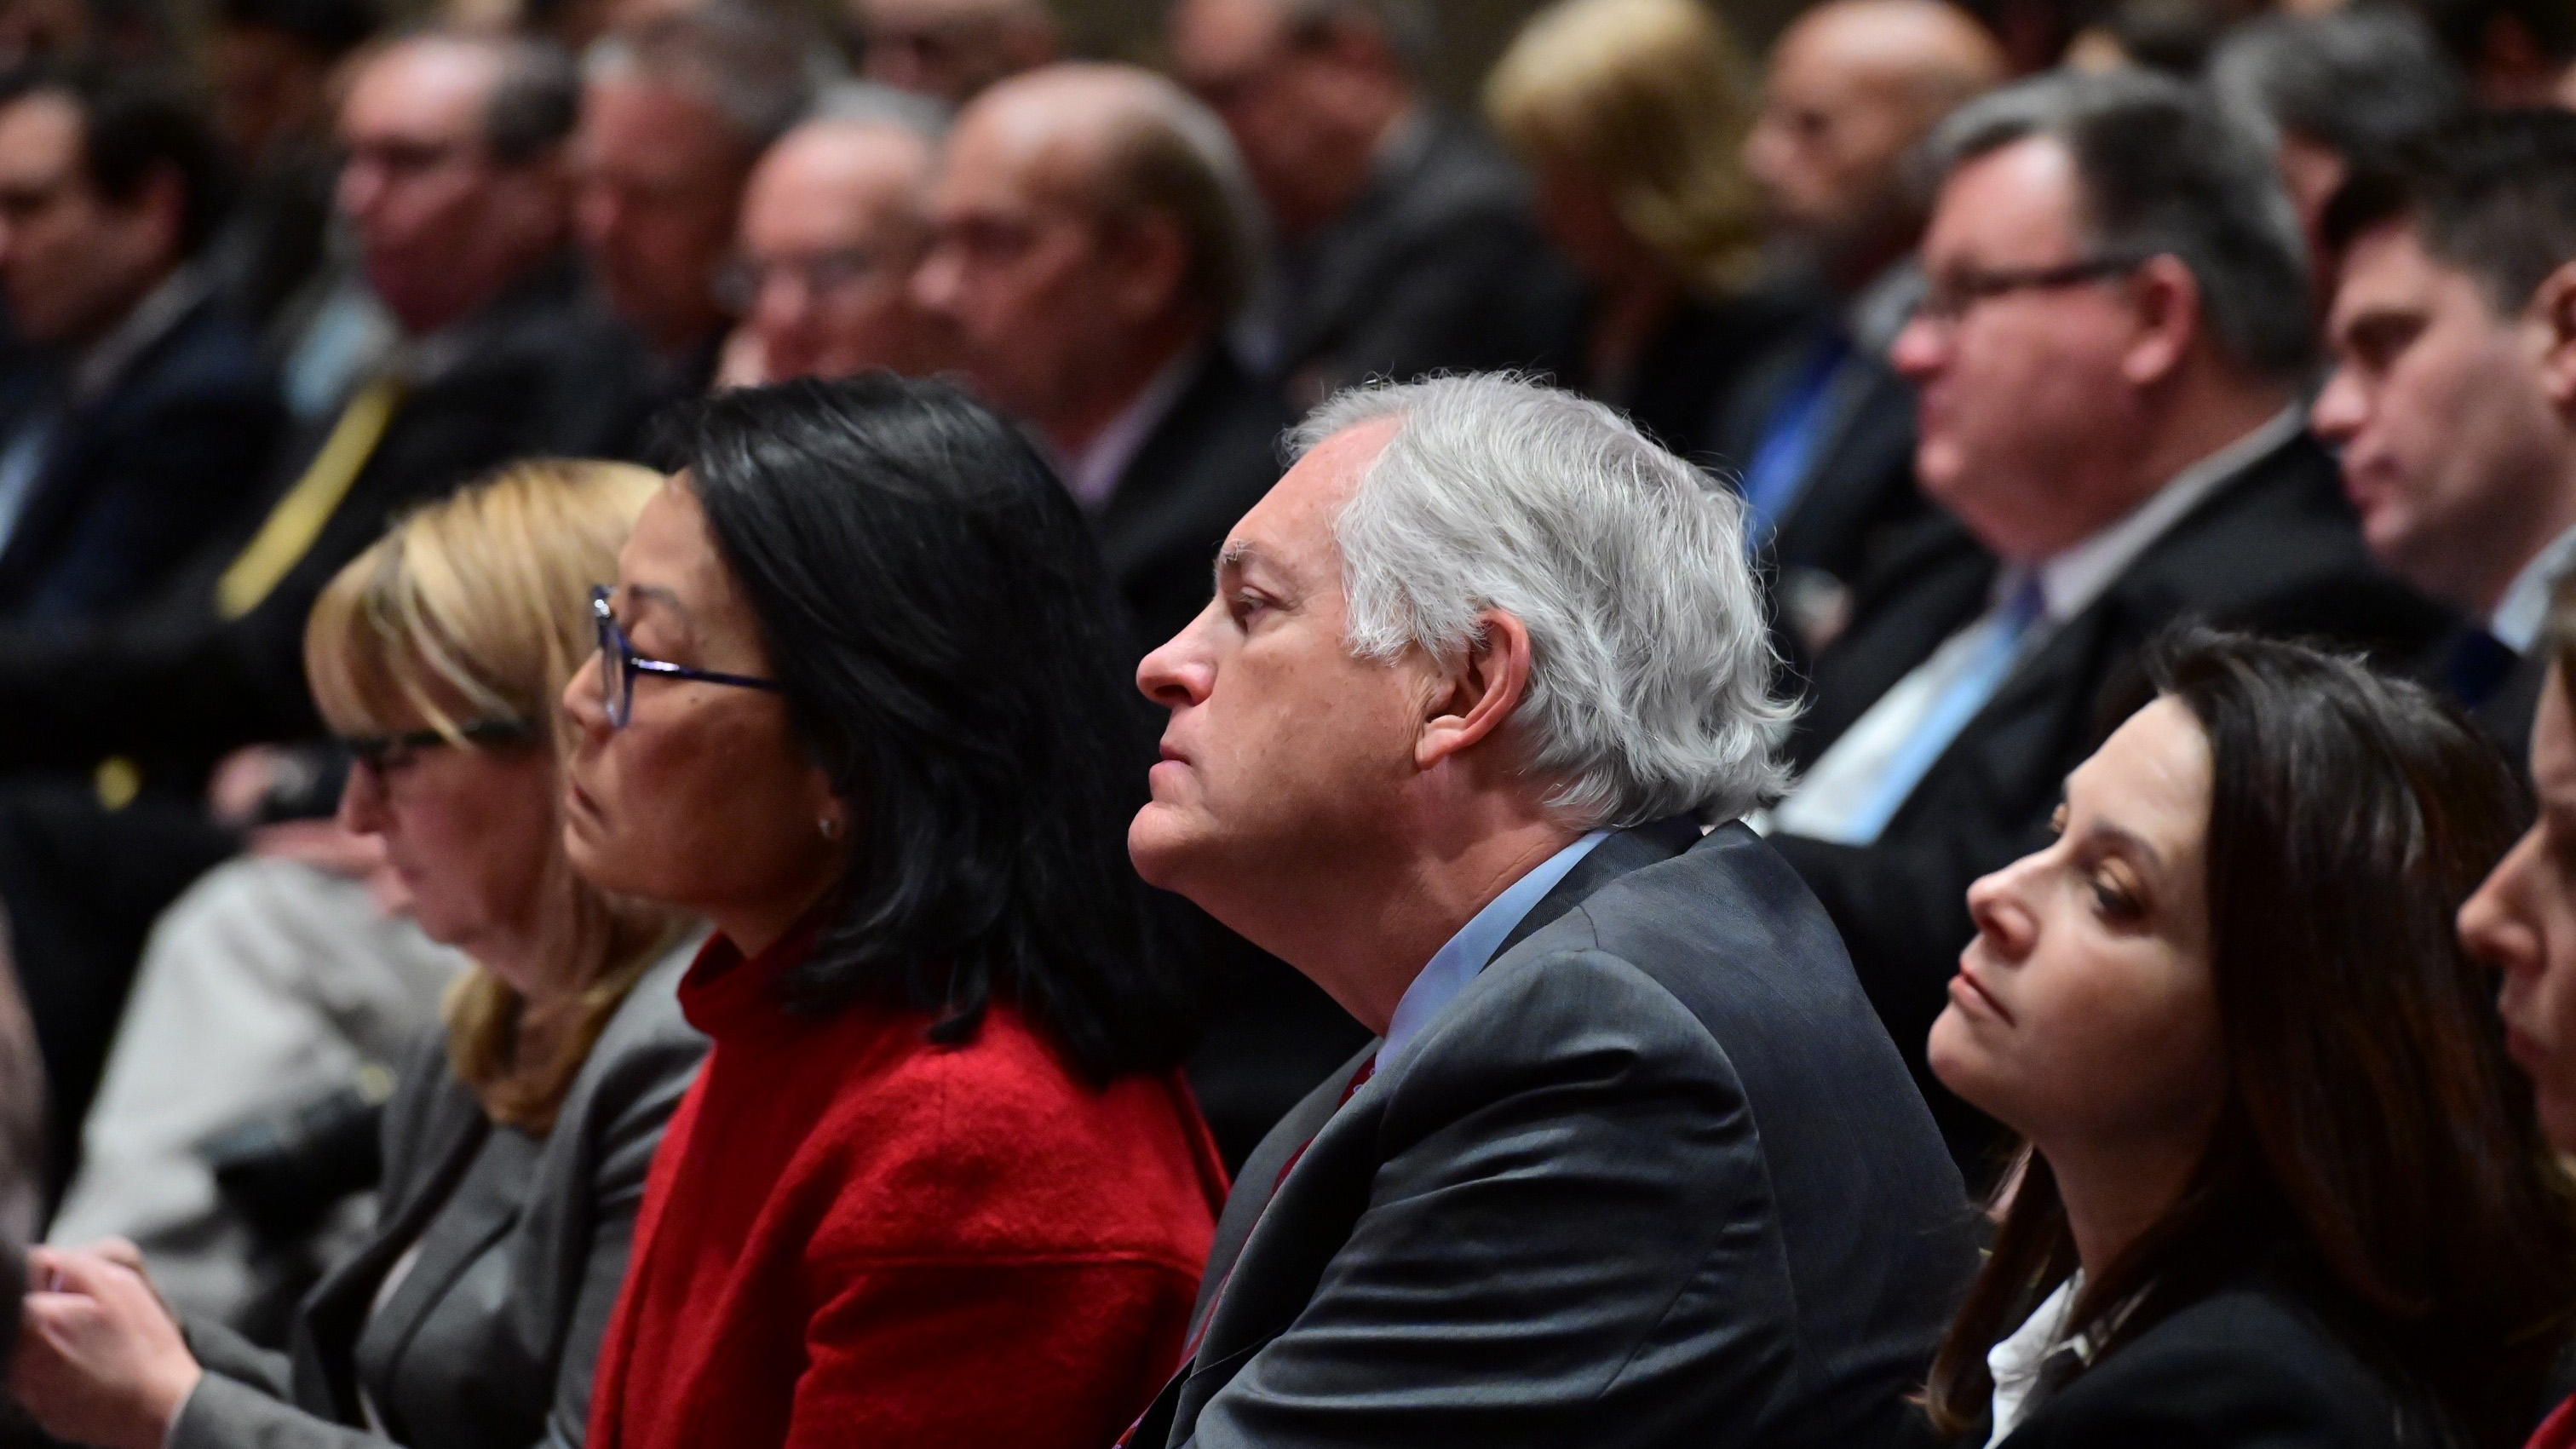 Attendees and GAMA members listen to the association’s 2018 Annual Report during the State of the Industry address in Washington, D.C., on Feb. 20. Photo by David Tulis.